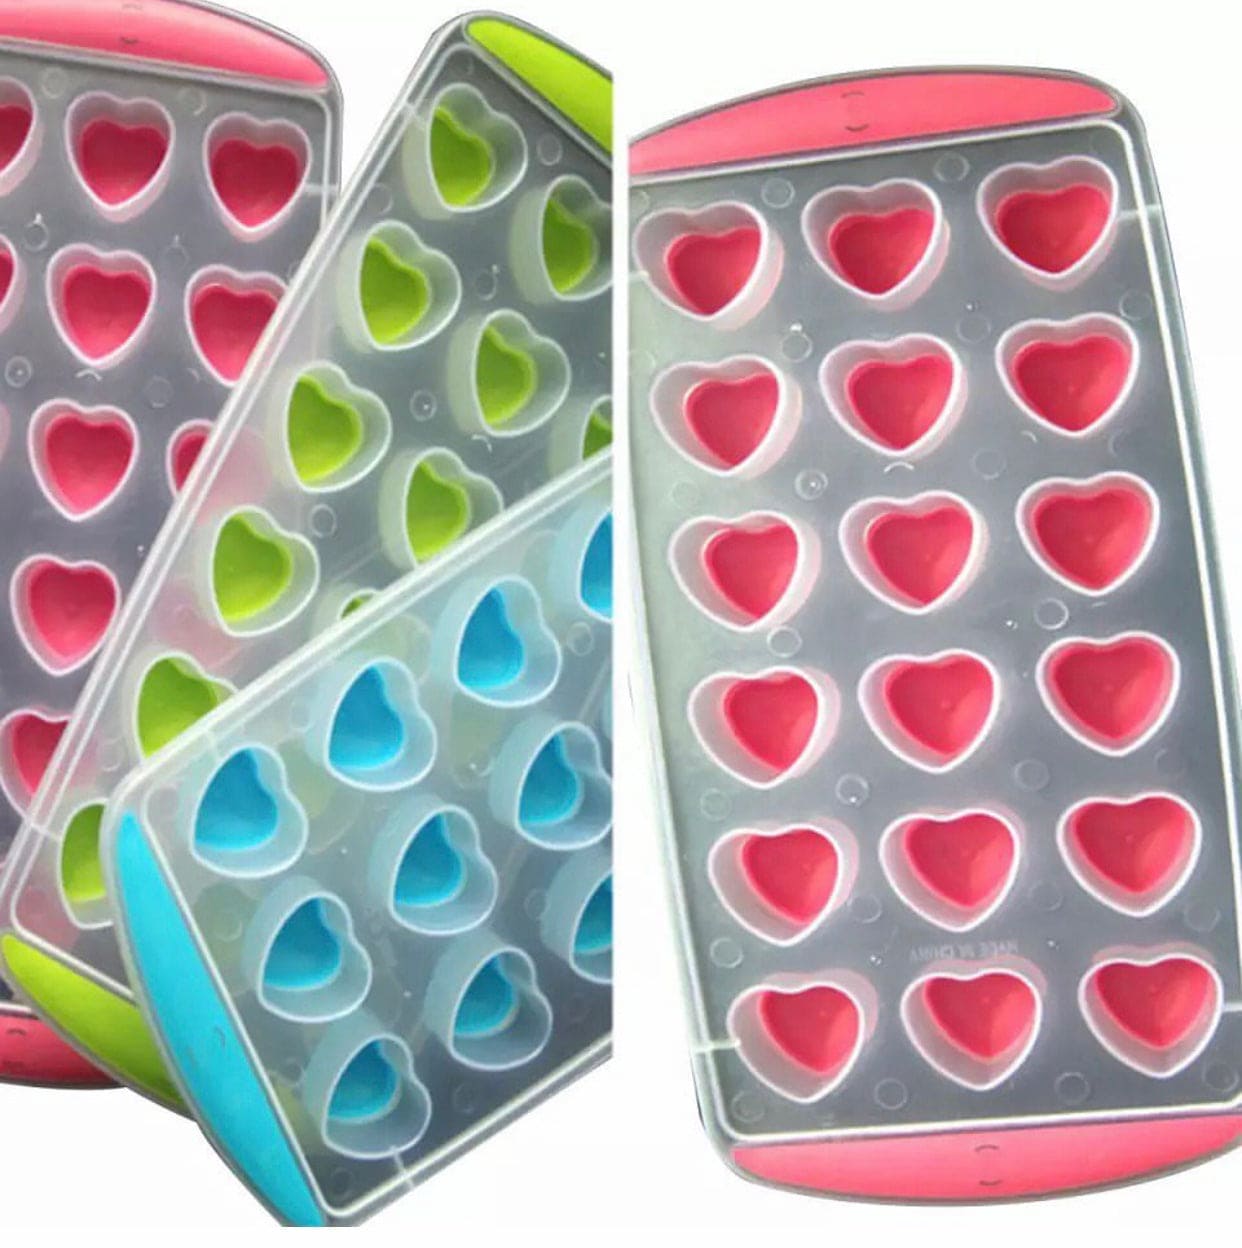 18 Grid Plastic Silicone Heart Shaped Chocolate And Ice Molds Tray, Easy-Flex Silicone Heart Mold